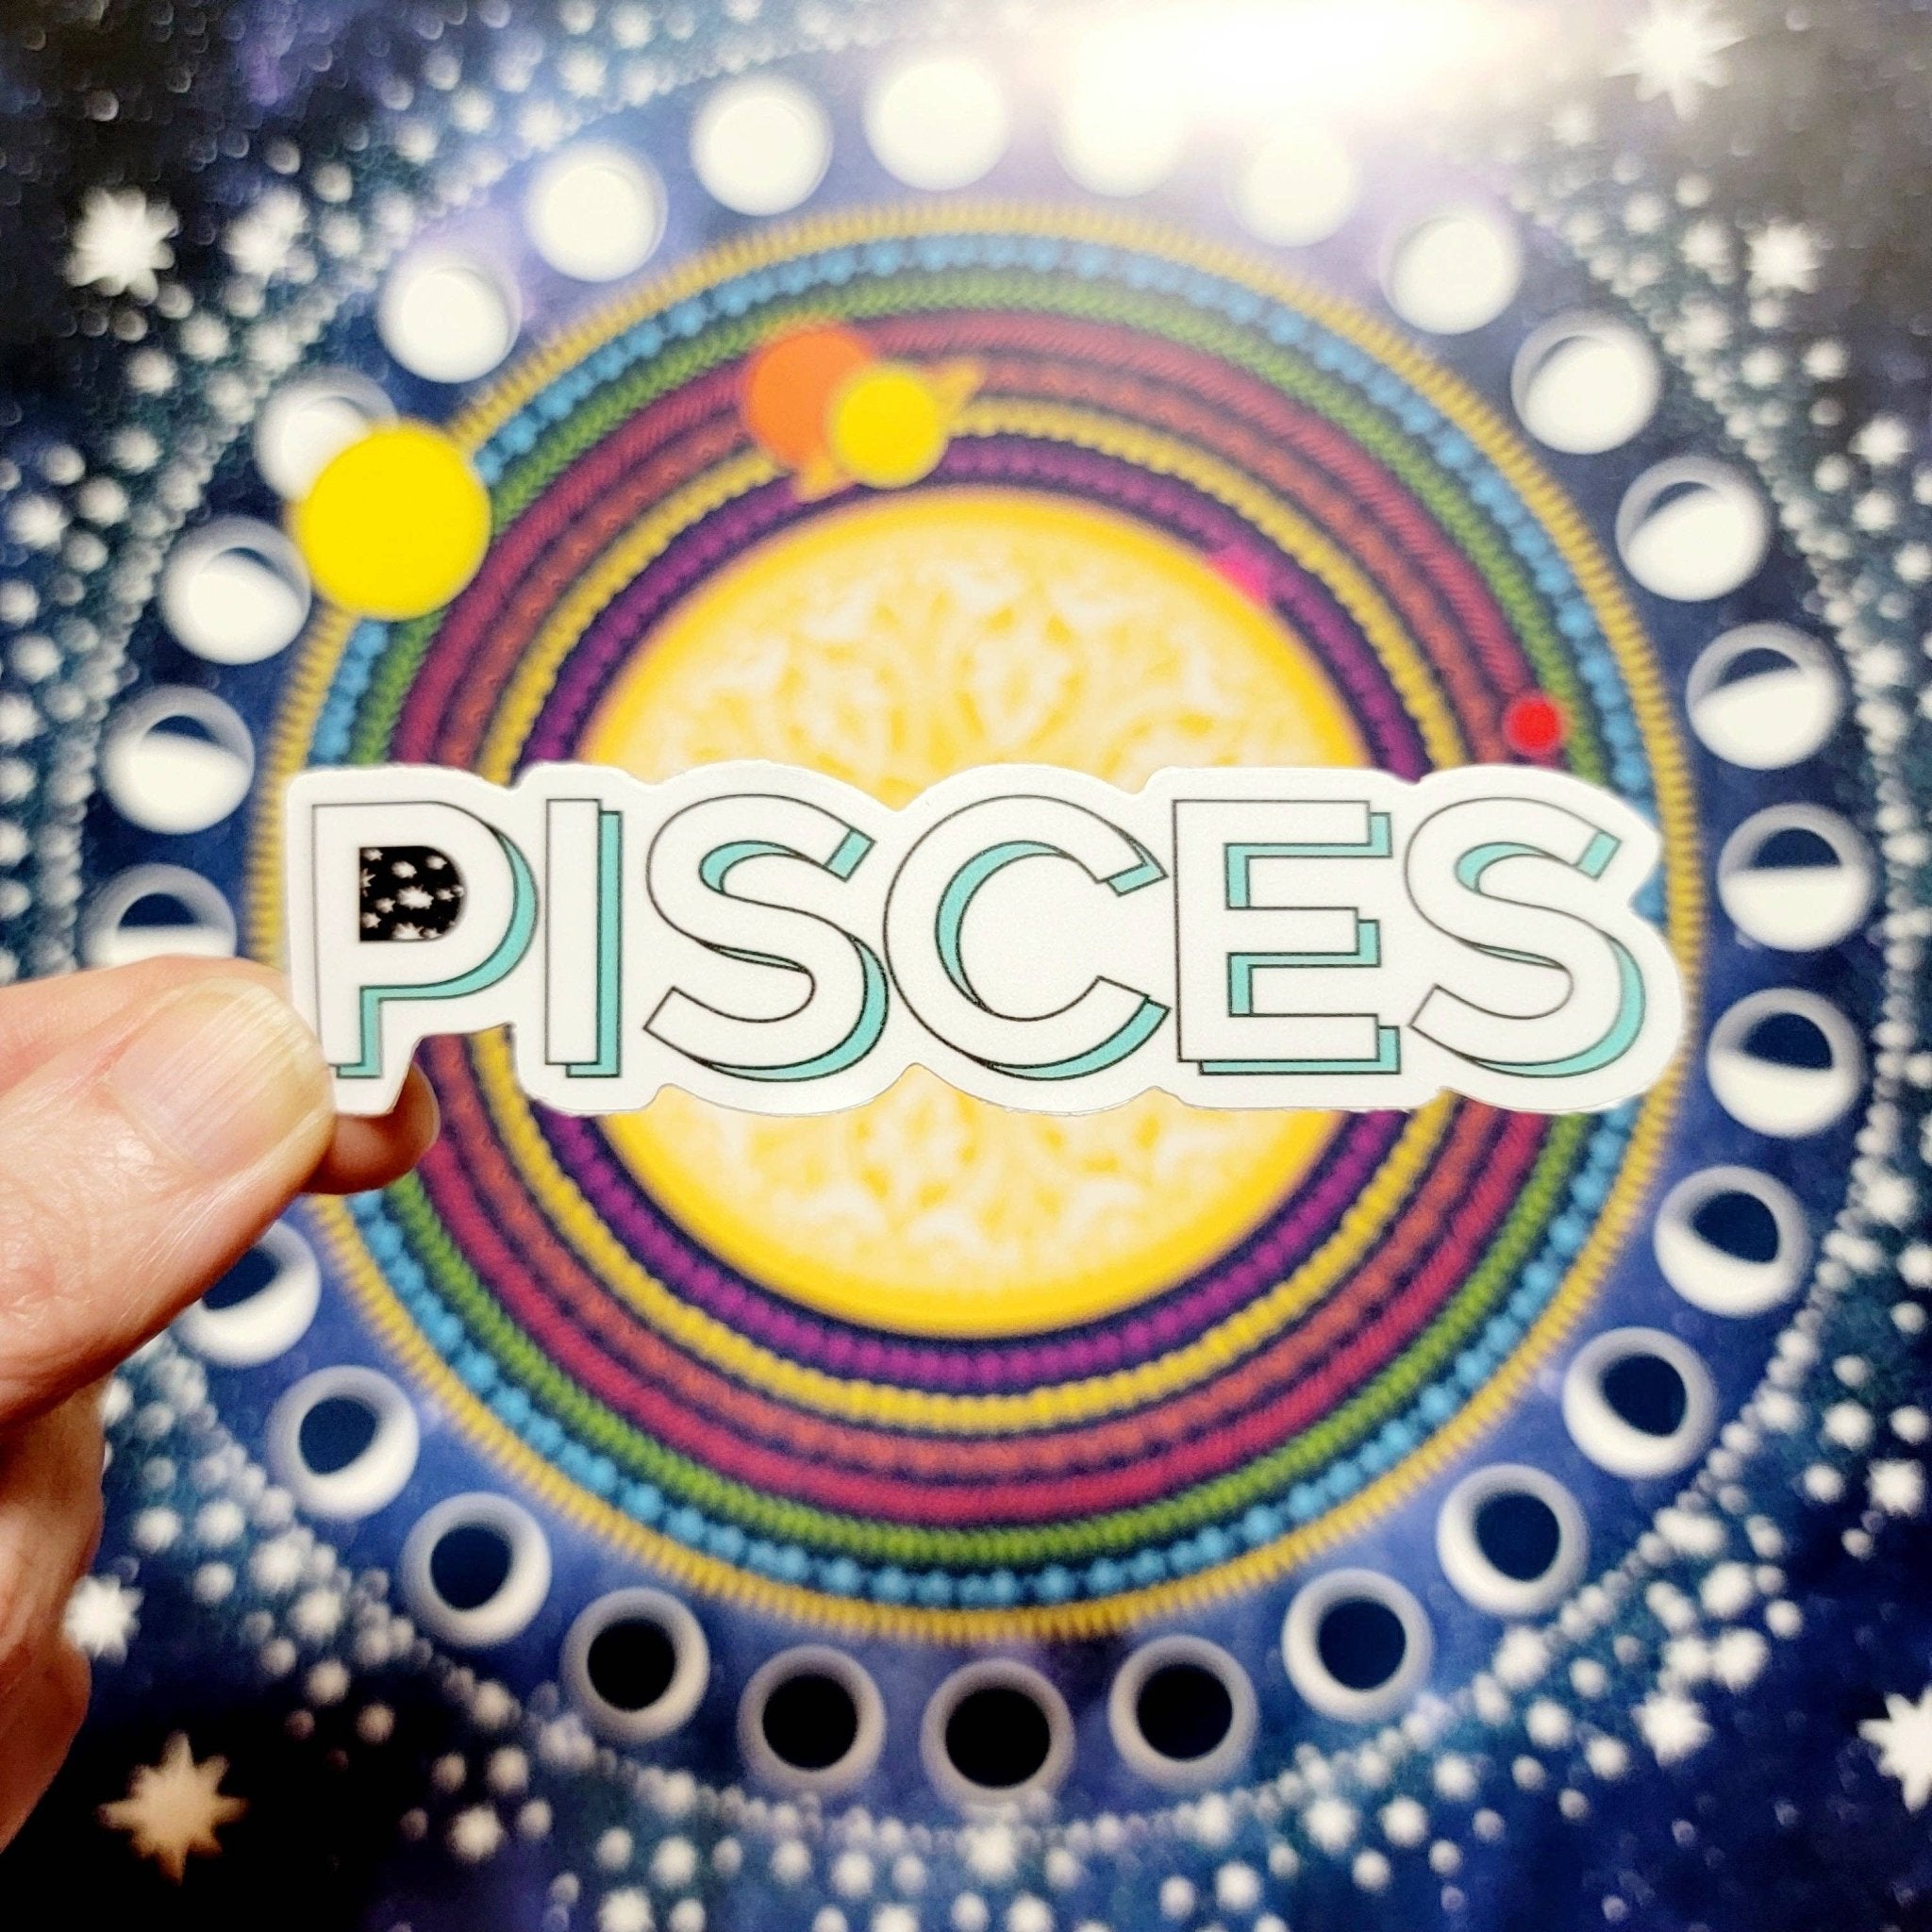 Pisces | Zodiac Sign Stickers - Spiral Circle